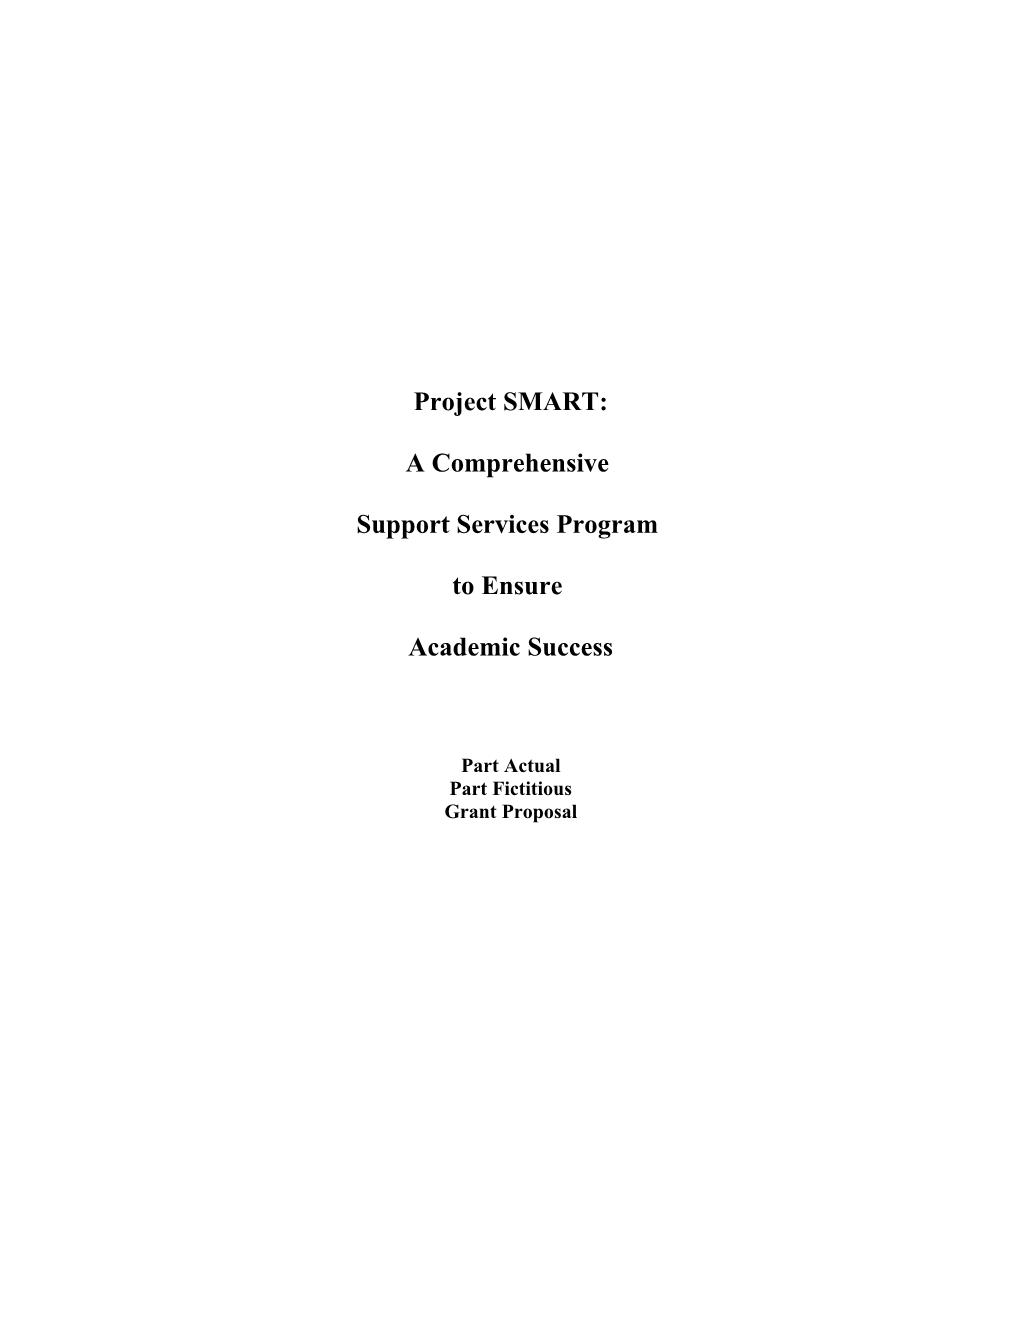 Support Services Program